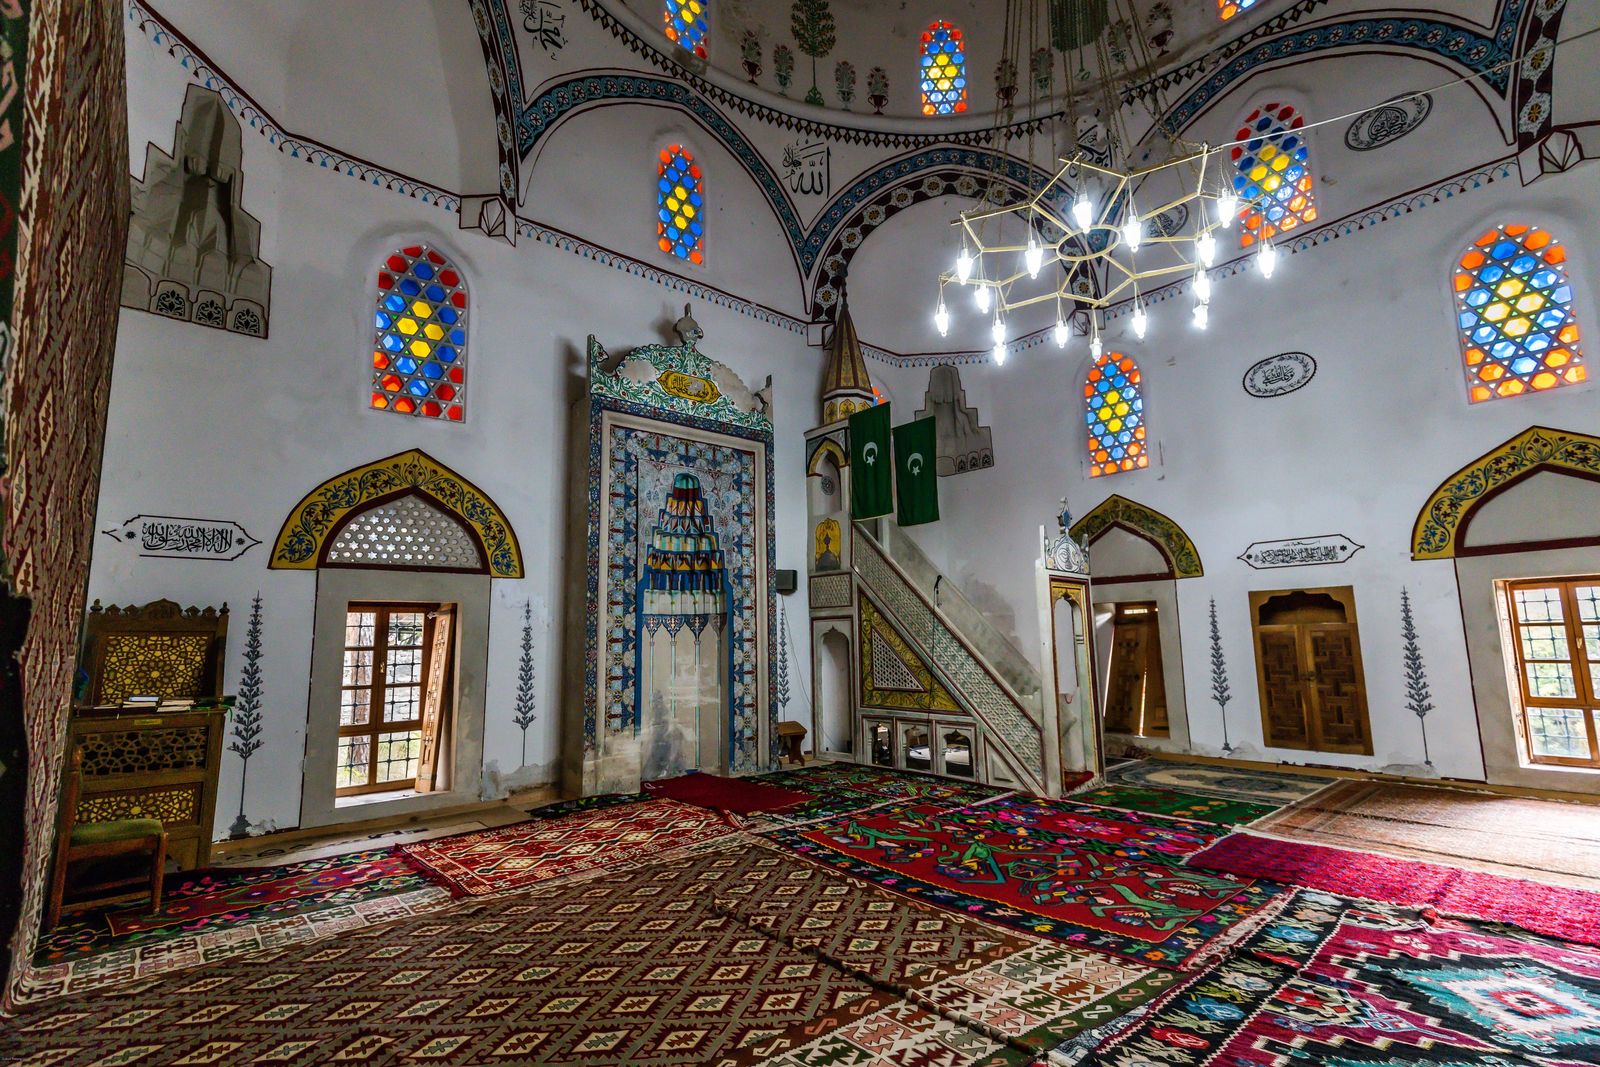 One Day In Mostar Bosnia - Pasha Mosque